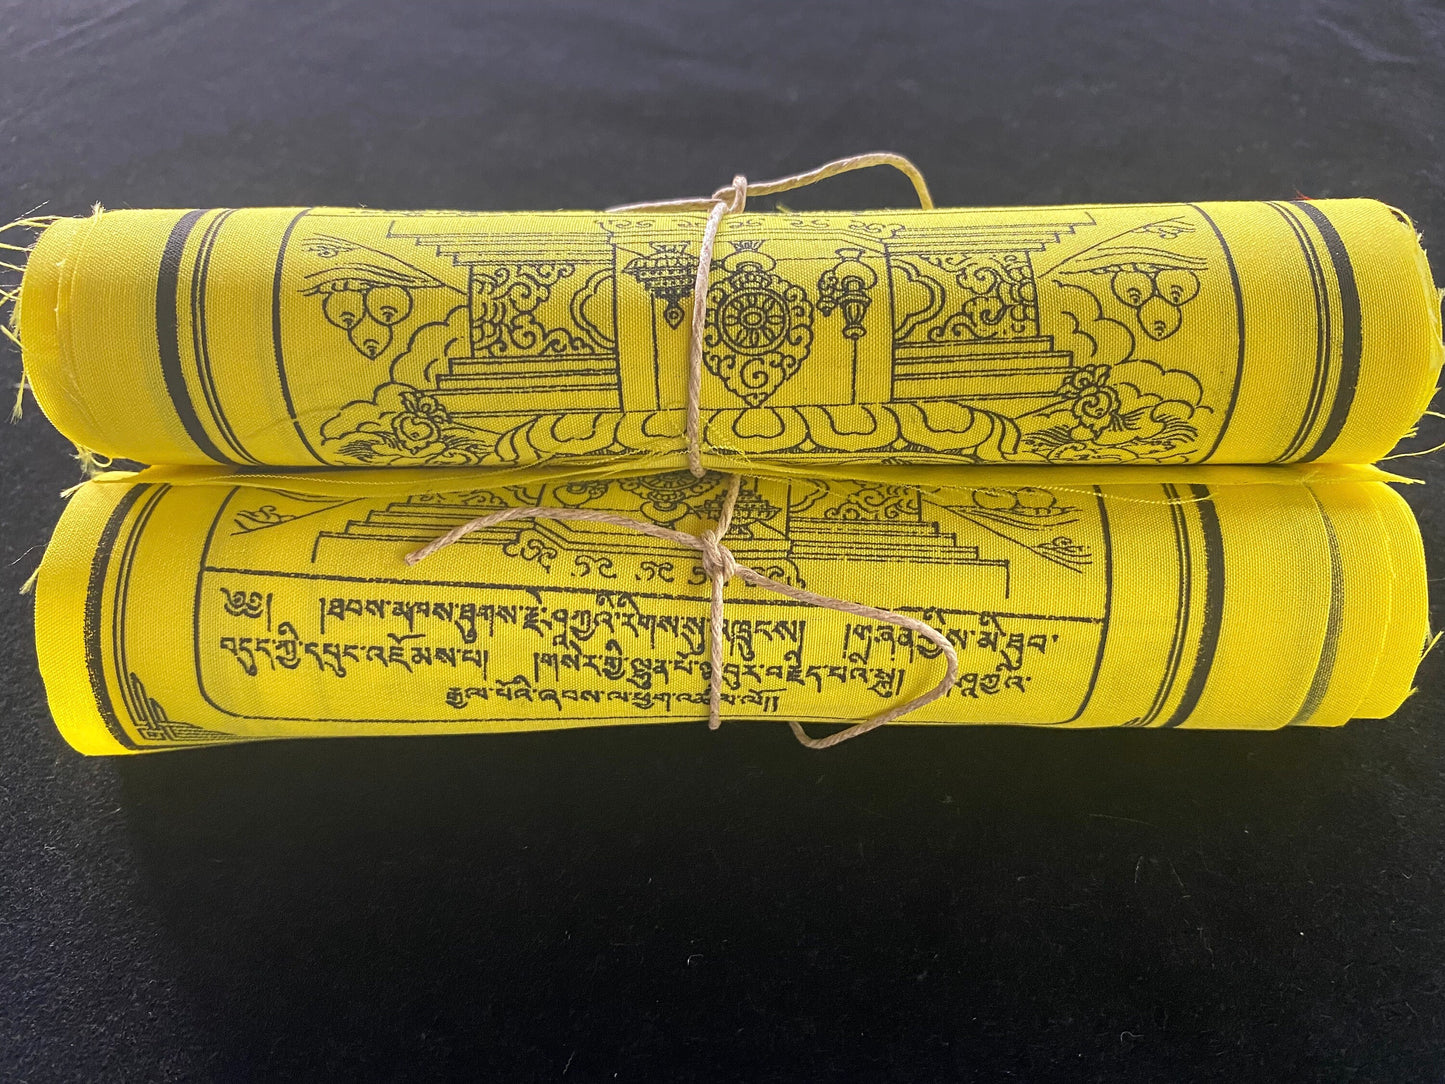 Admire a stunning close-up of 2 rolls of 10 all-yellow Buddha Shakyamuni Prayer flags, each 6&quot;x7.5&quot;, arranged on a black background.